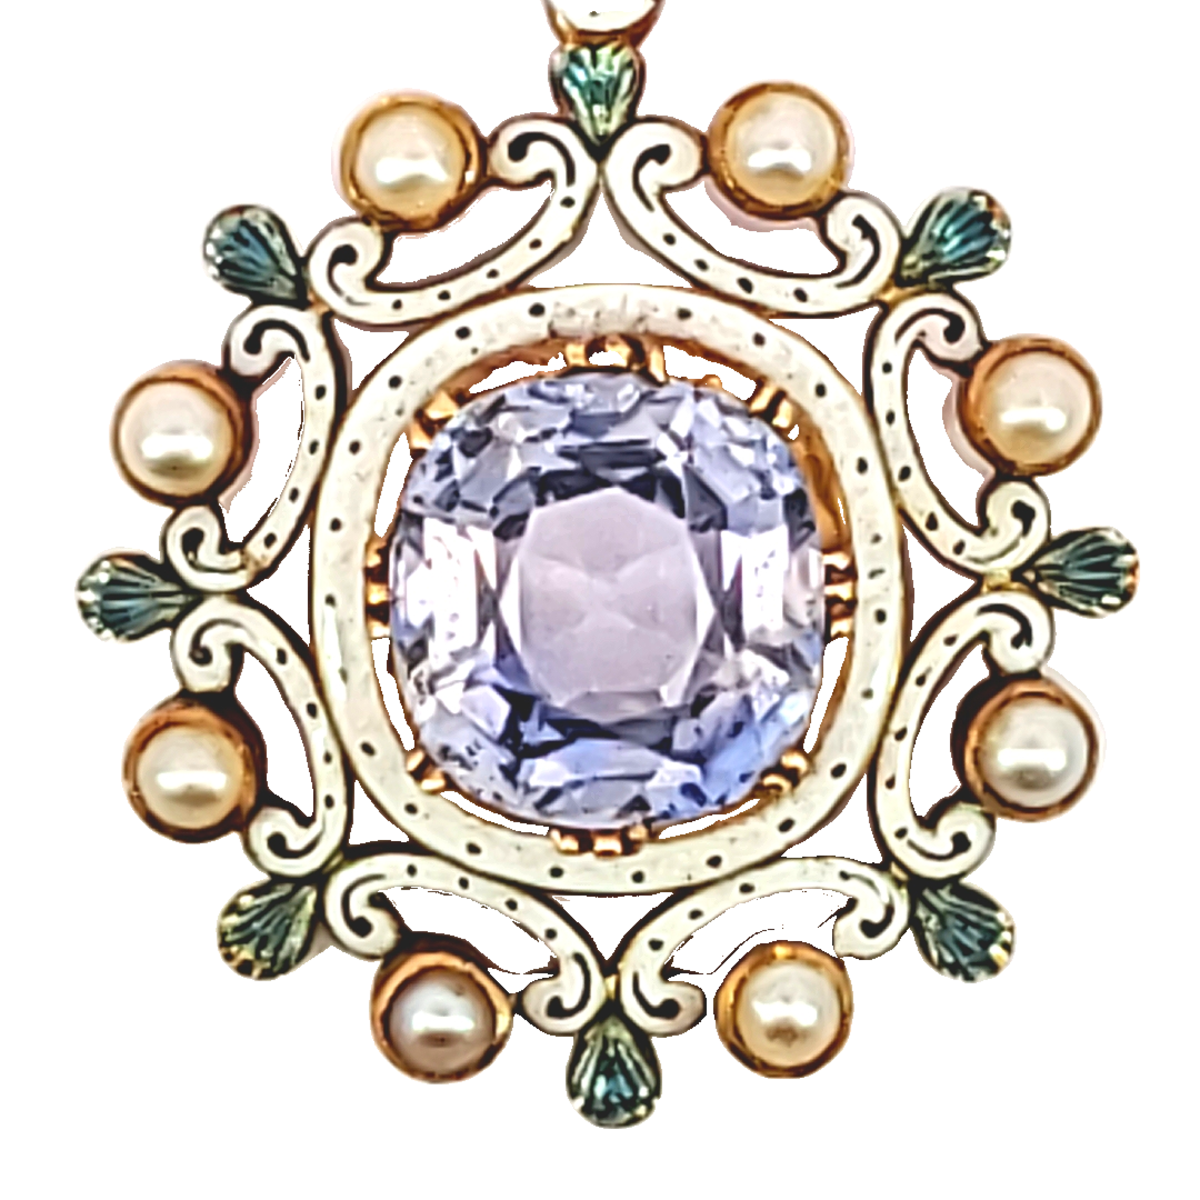 Antique 18KT Yellow Gold Sapphire & Natural Pearl Pendant close-up details